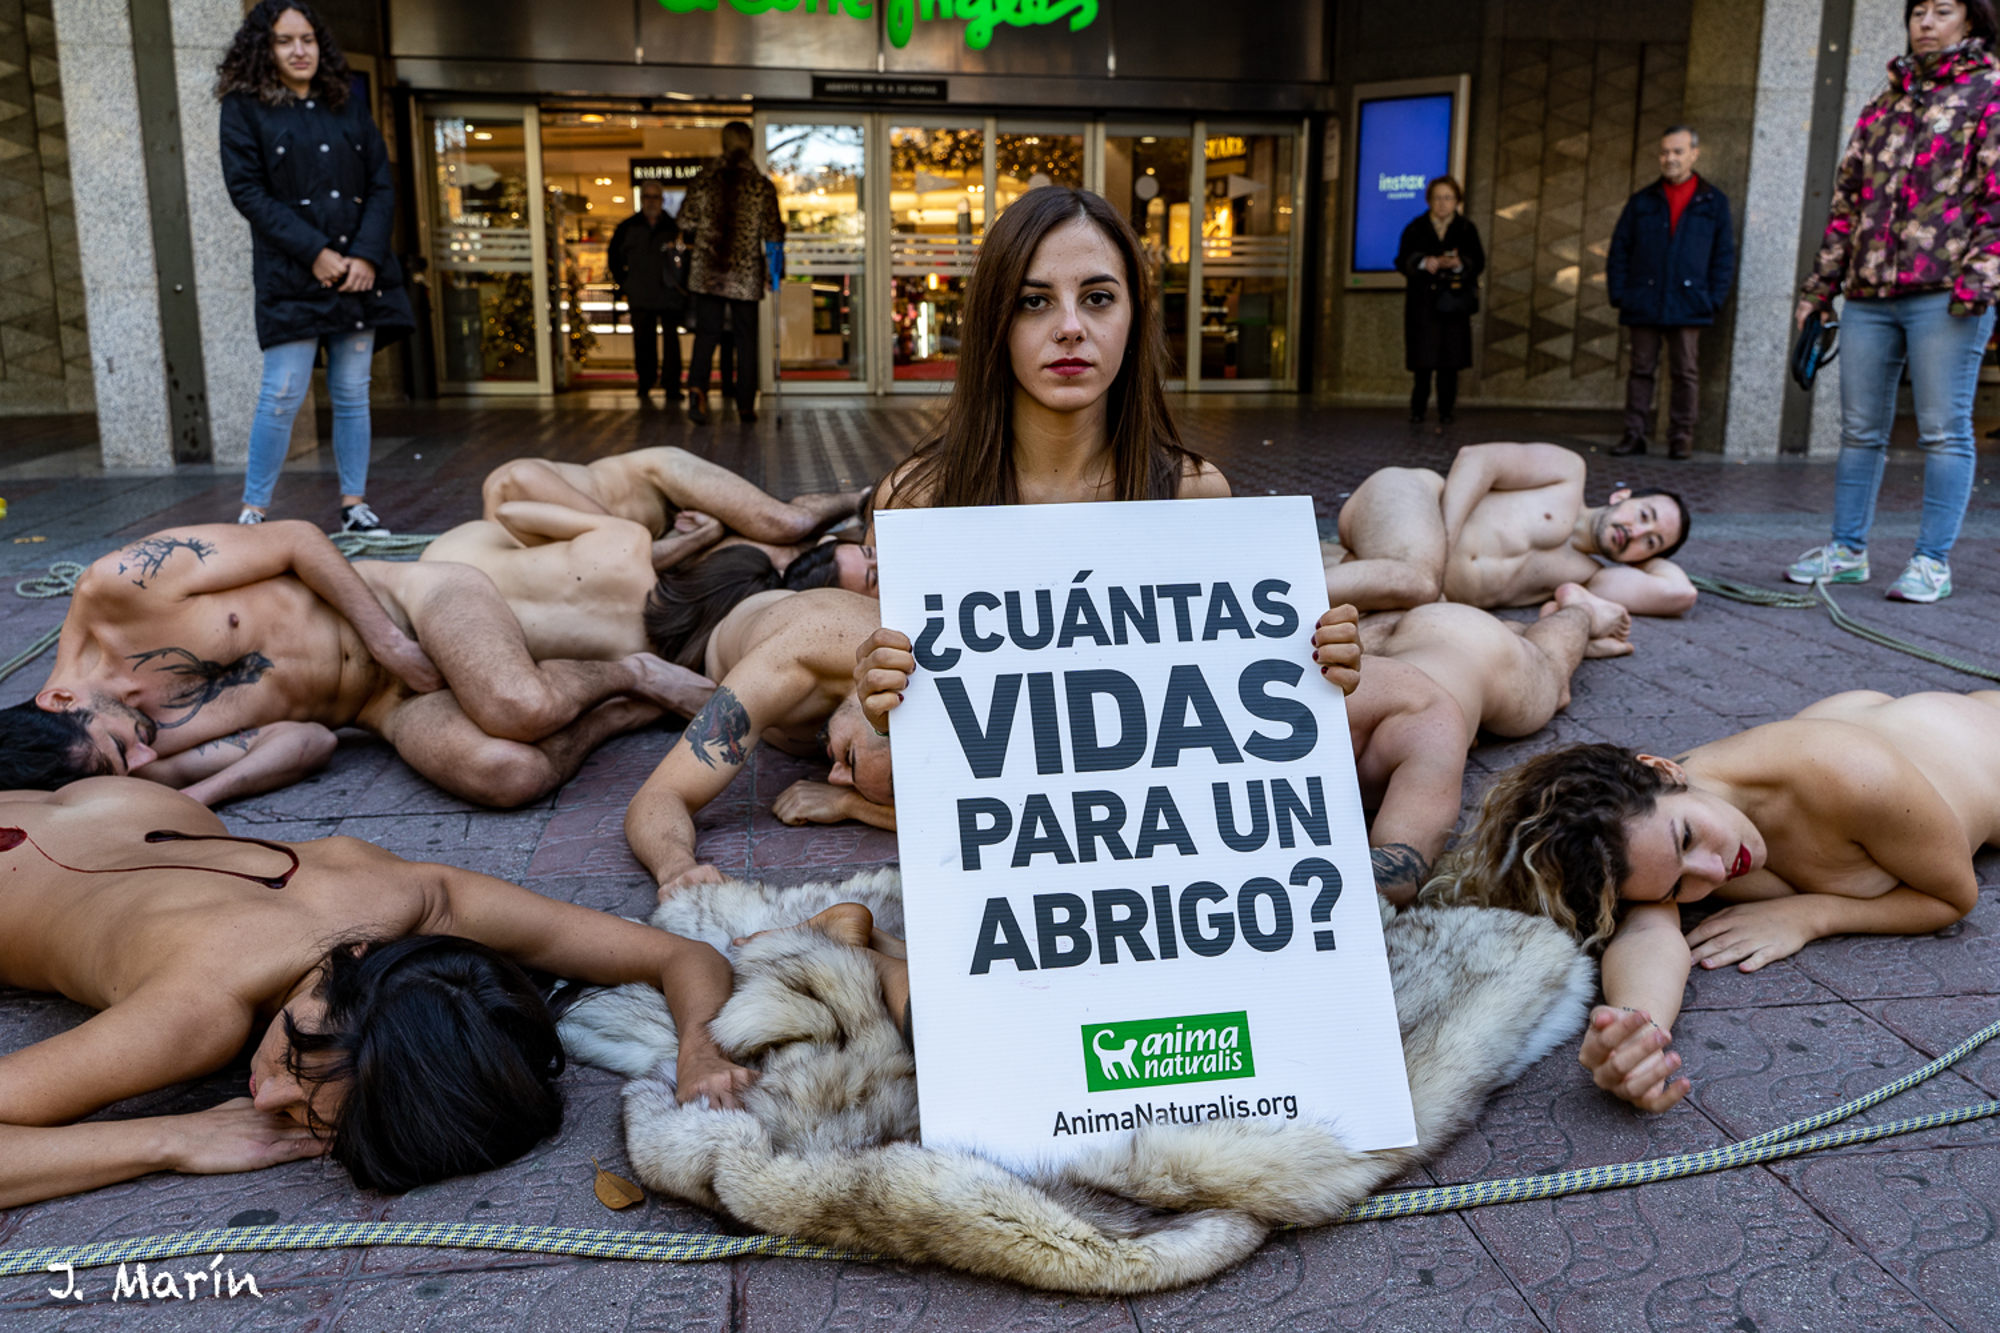 Read more about the article Nude Activists Covered In Blood At Spain Shopping Centre